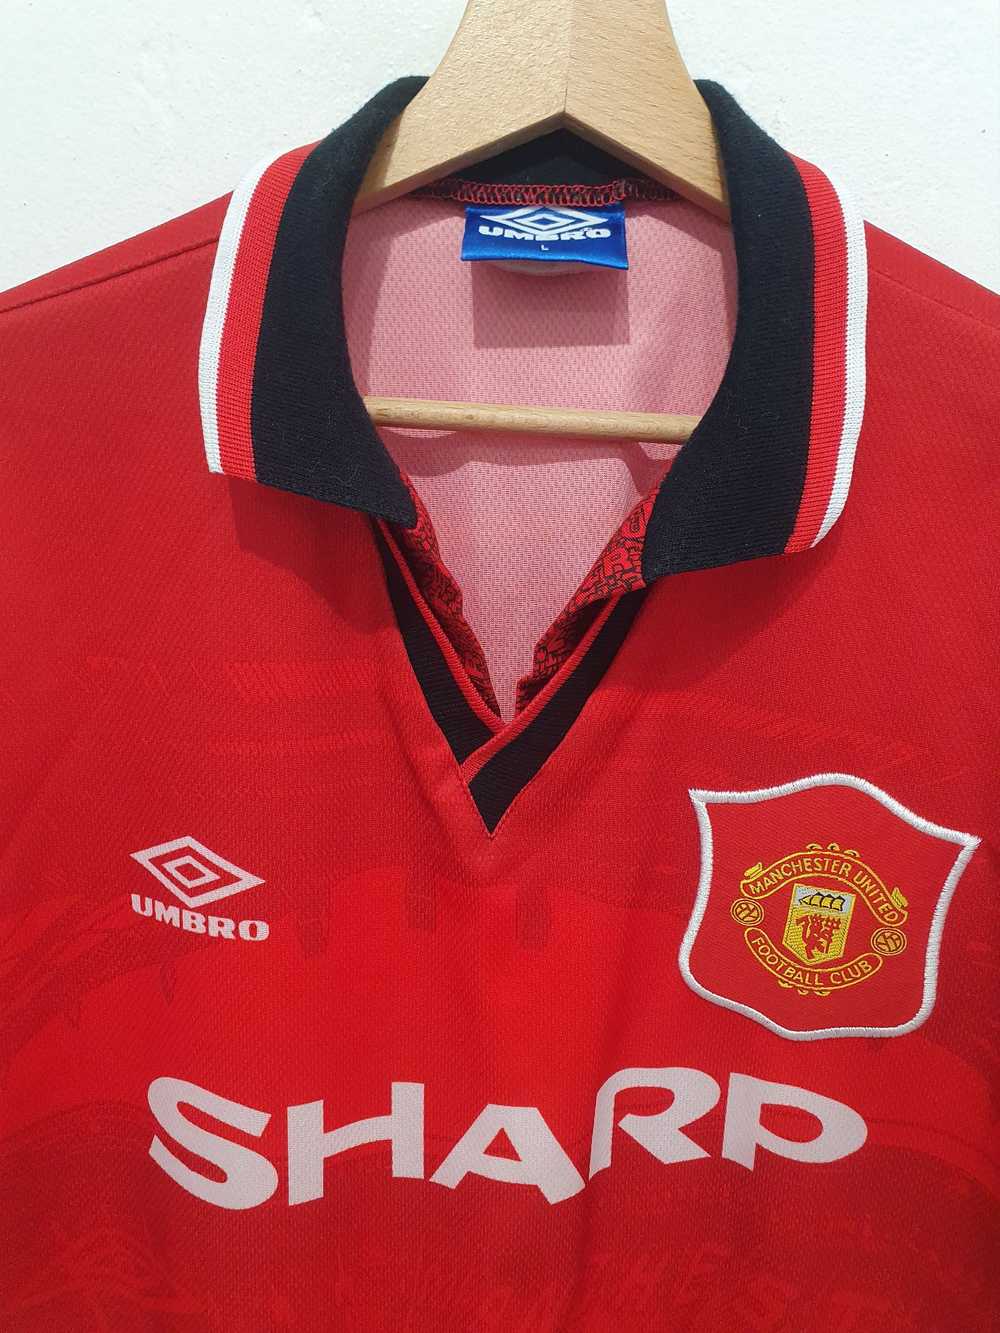 Jersey × Manchester United × Soccer Jersey MANCHE… - image 3